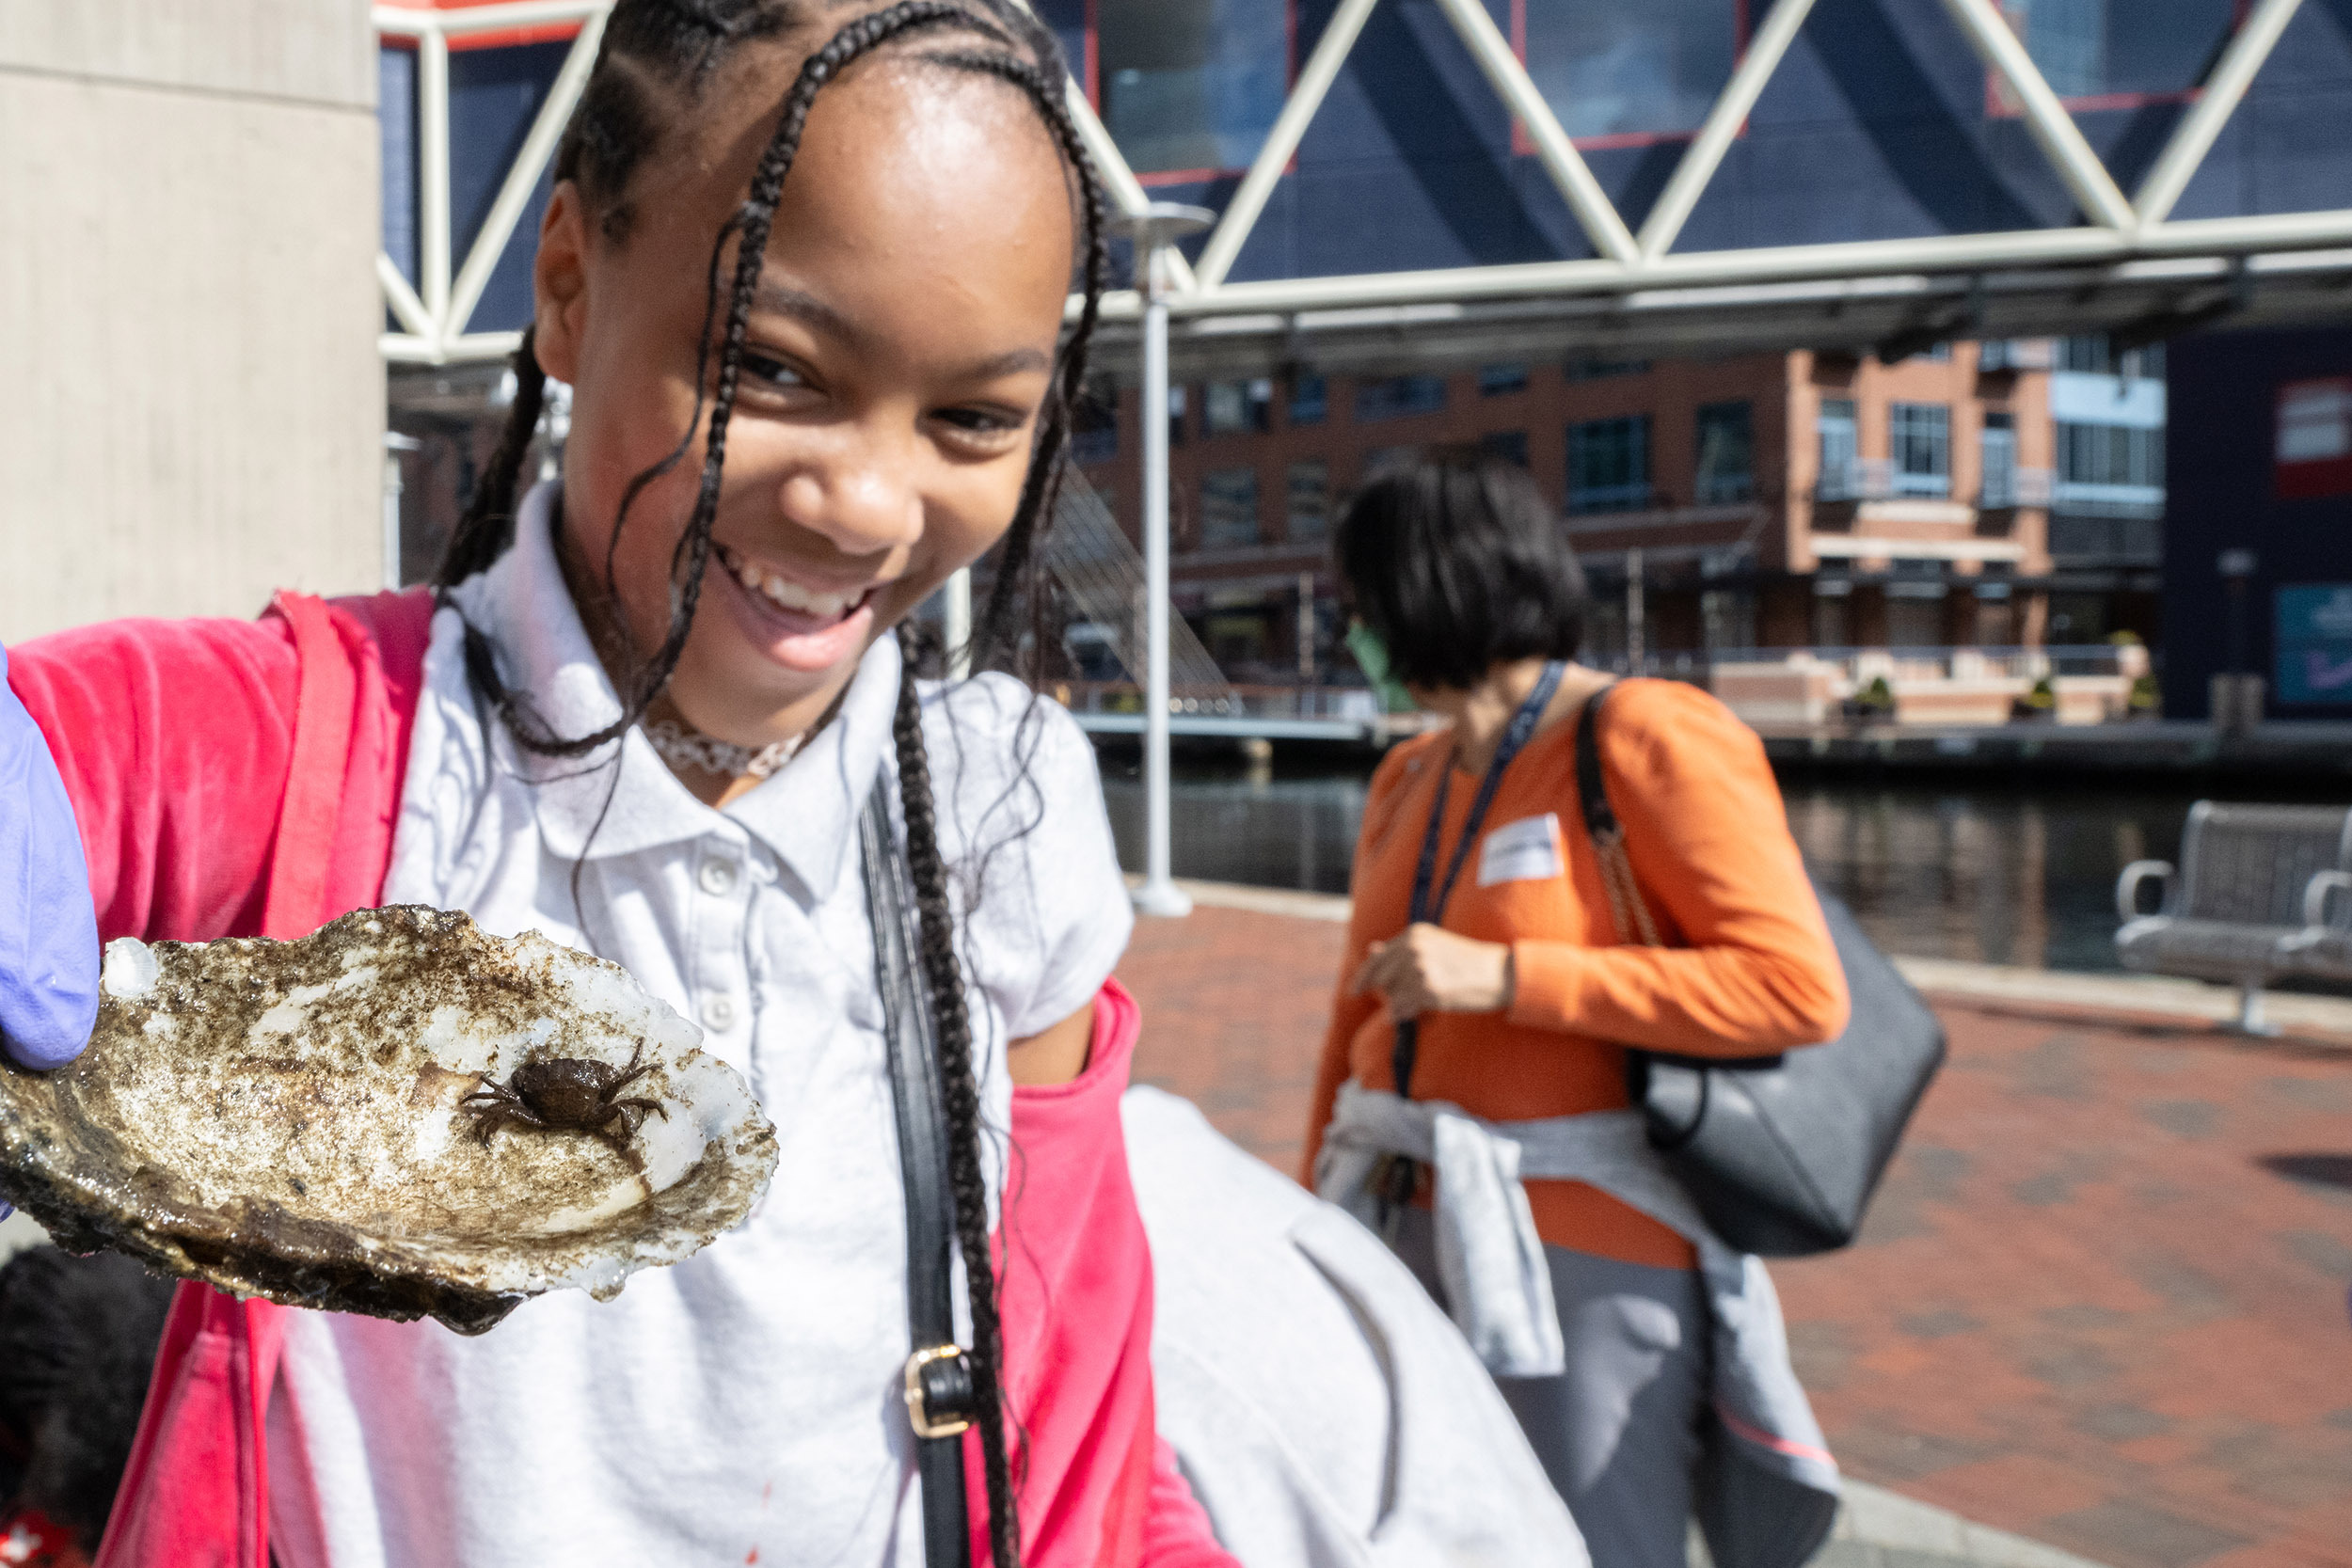 Young Girl Smiling While Holding an Oyster Shell With a Crab in it During the What Lives in the Harbor Program